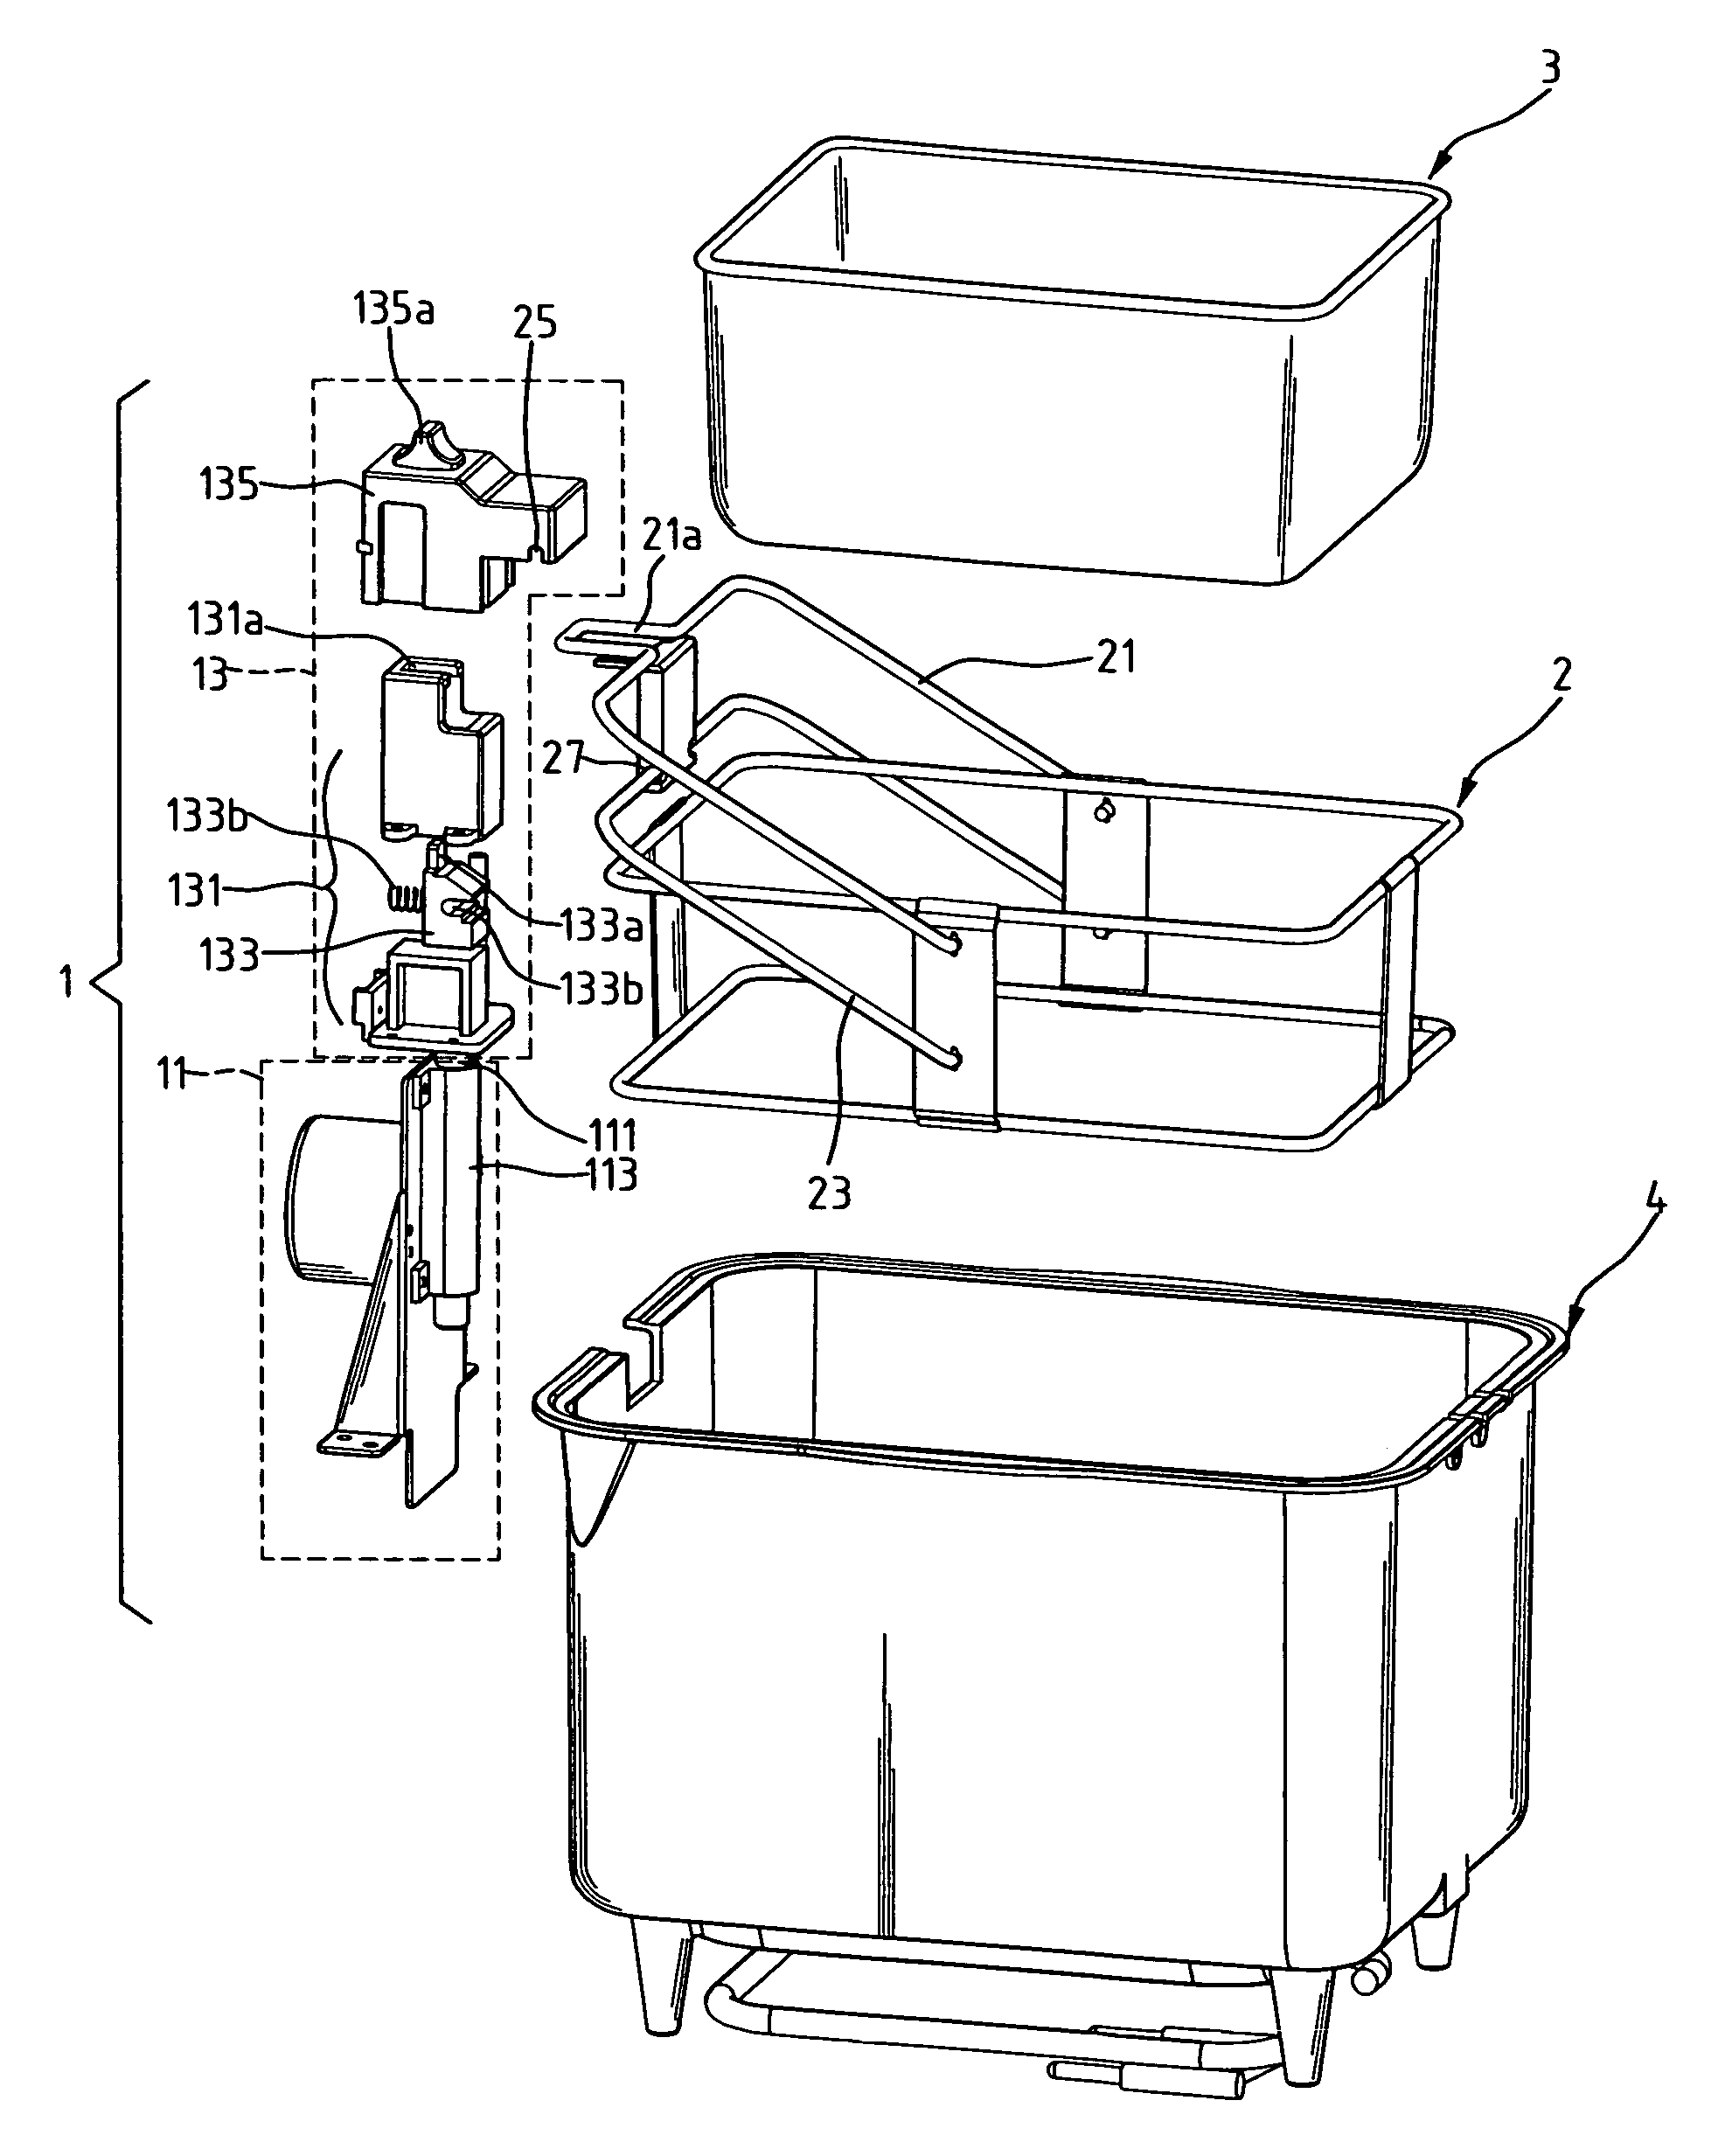 Control mechanism for deep fryer to control elevation of basket received in the deep fryer